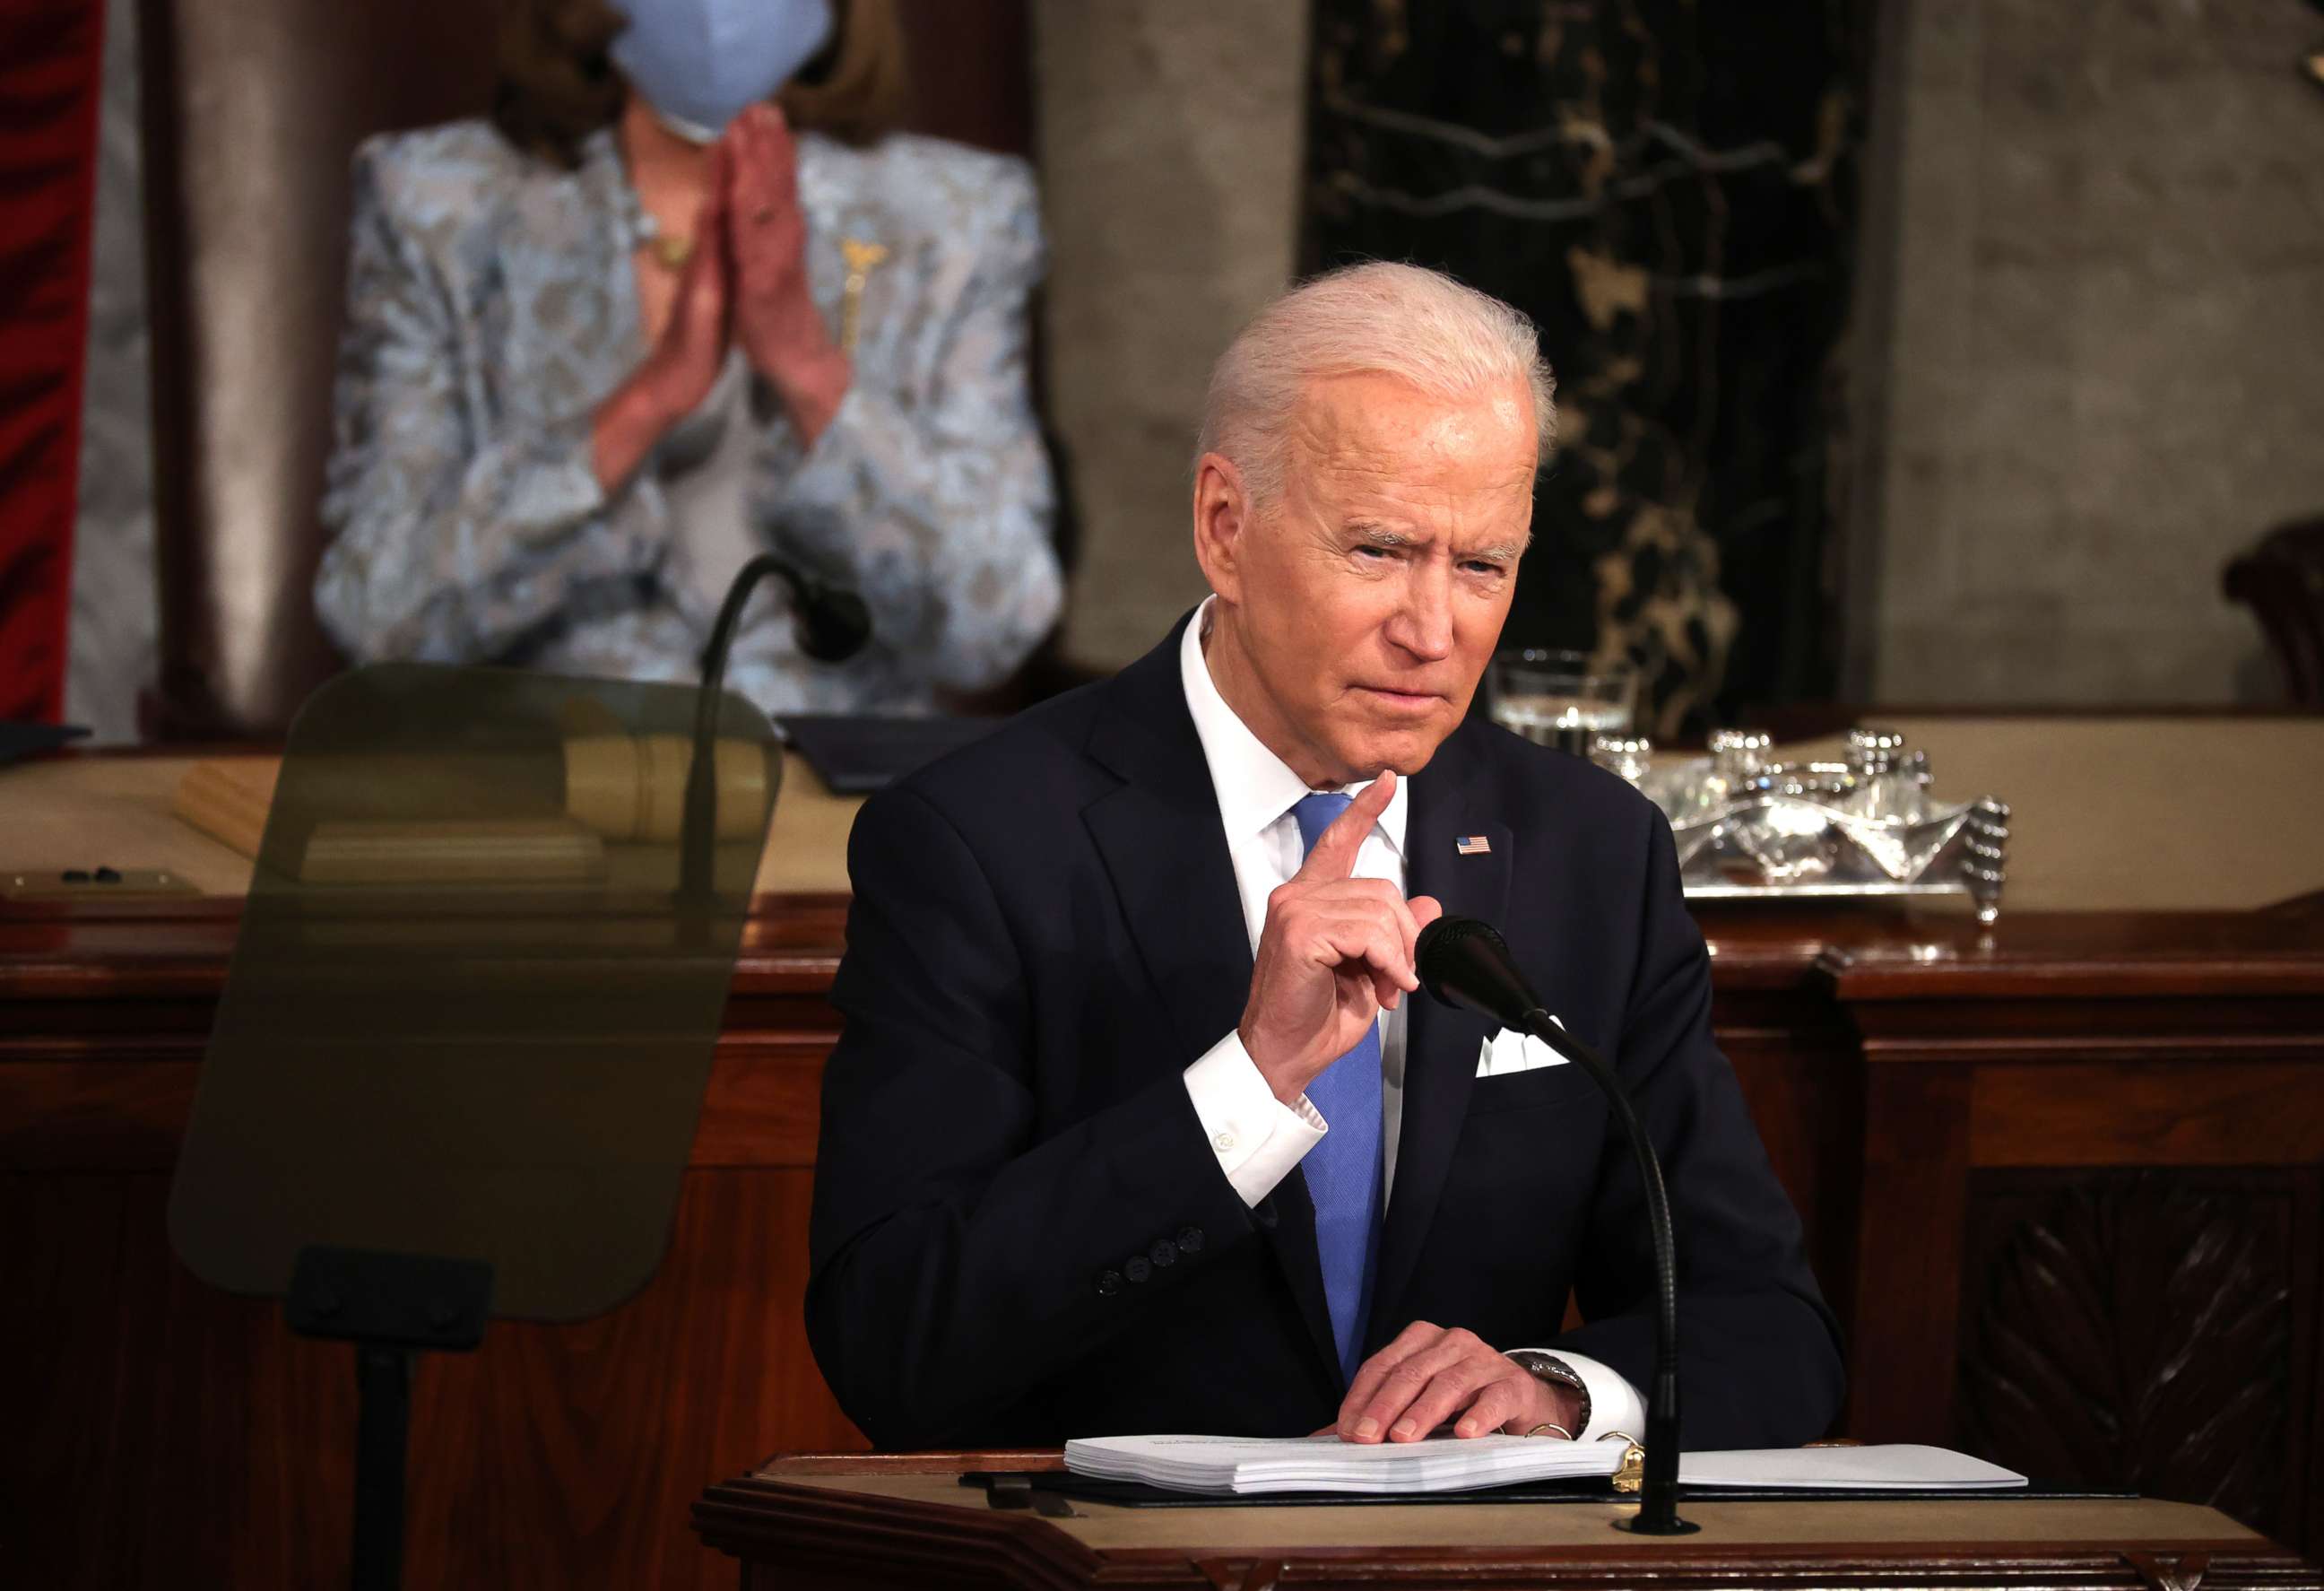 PHOTO: President Joe Biden addresses a joint session of congress in the House chamber of the U.S. Capitol, April 28, 2021, in Washington.